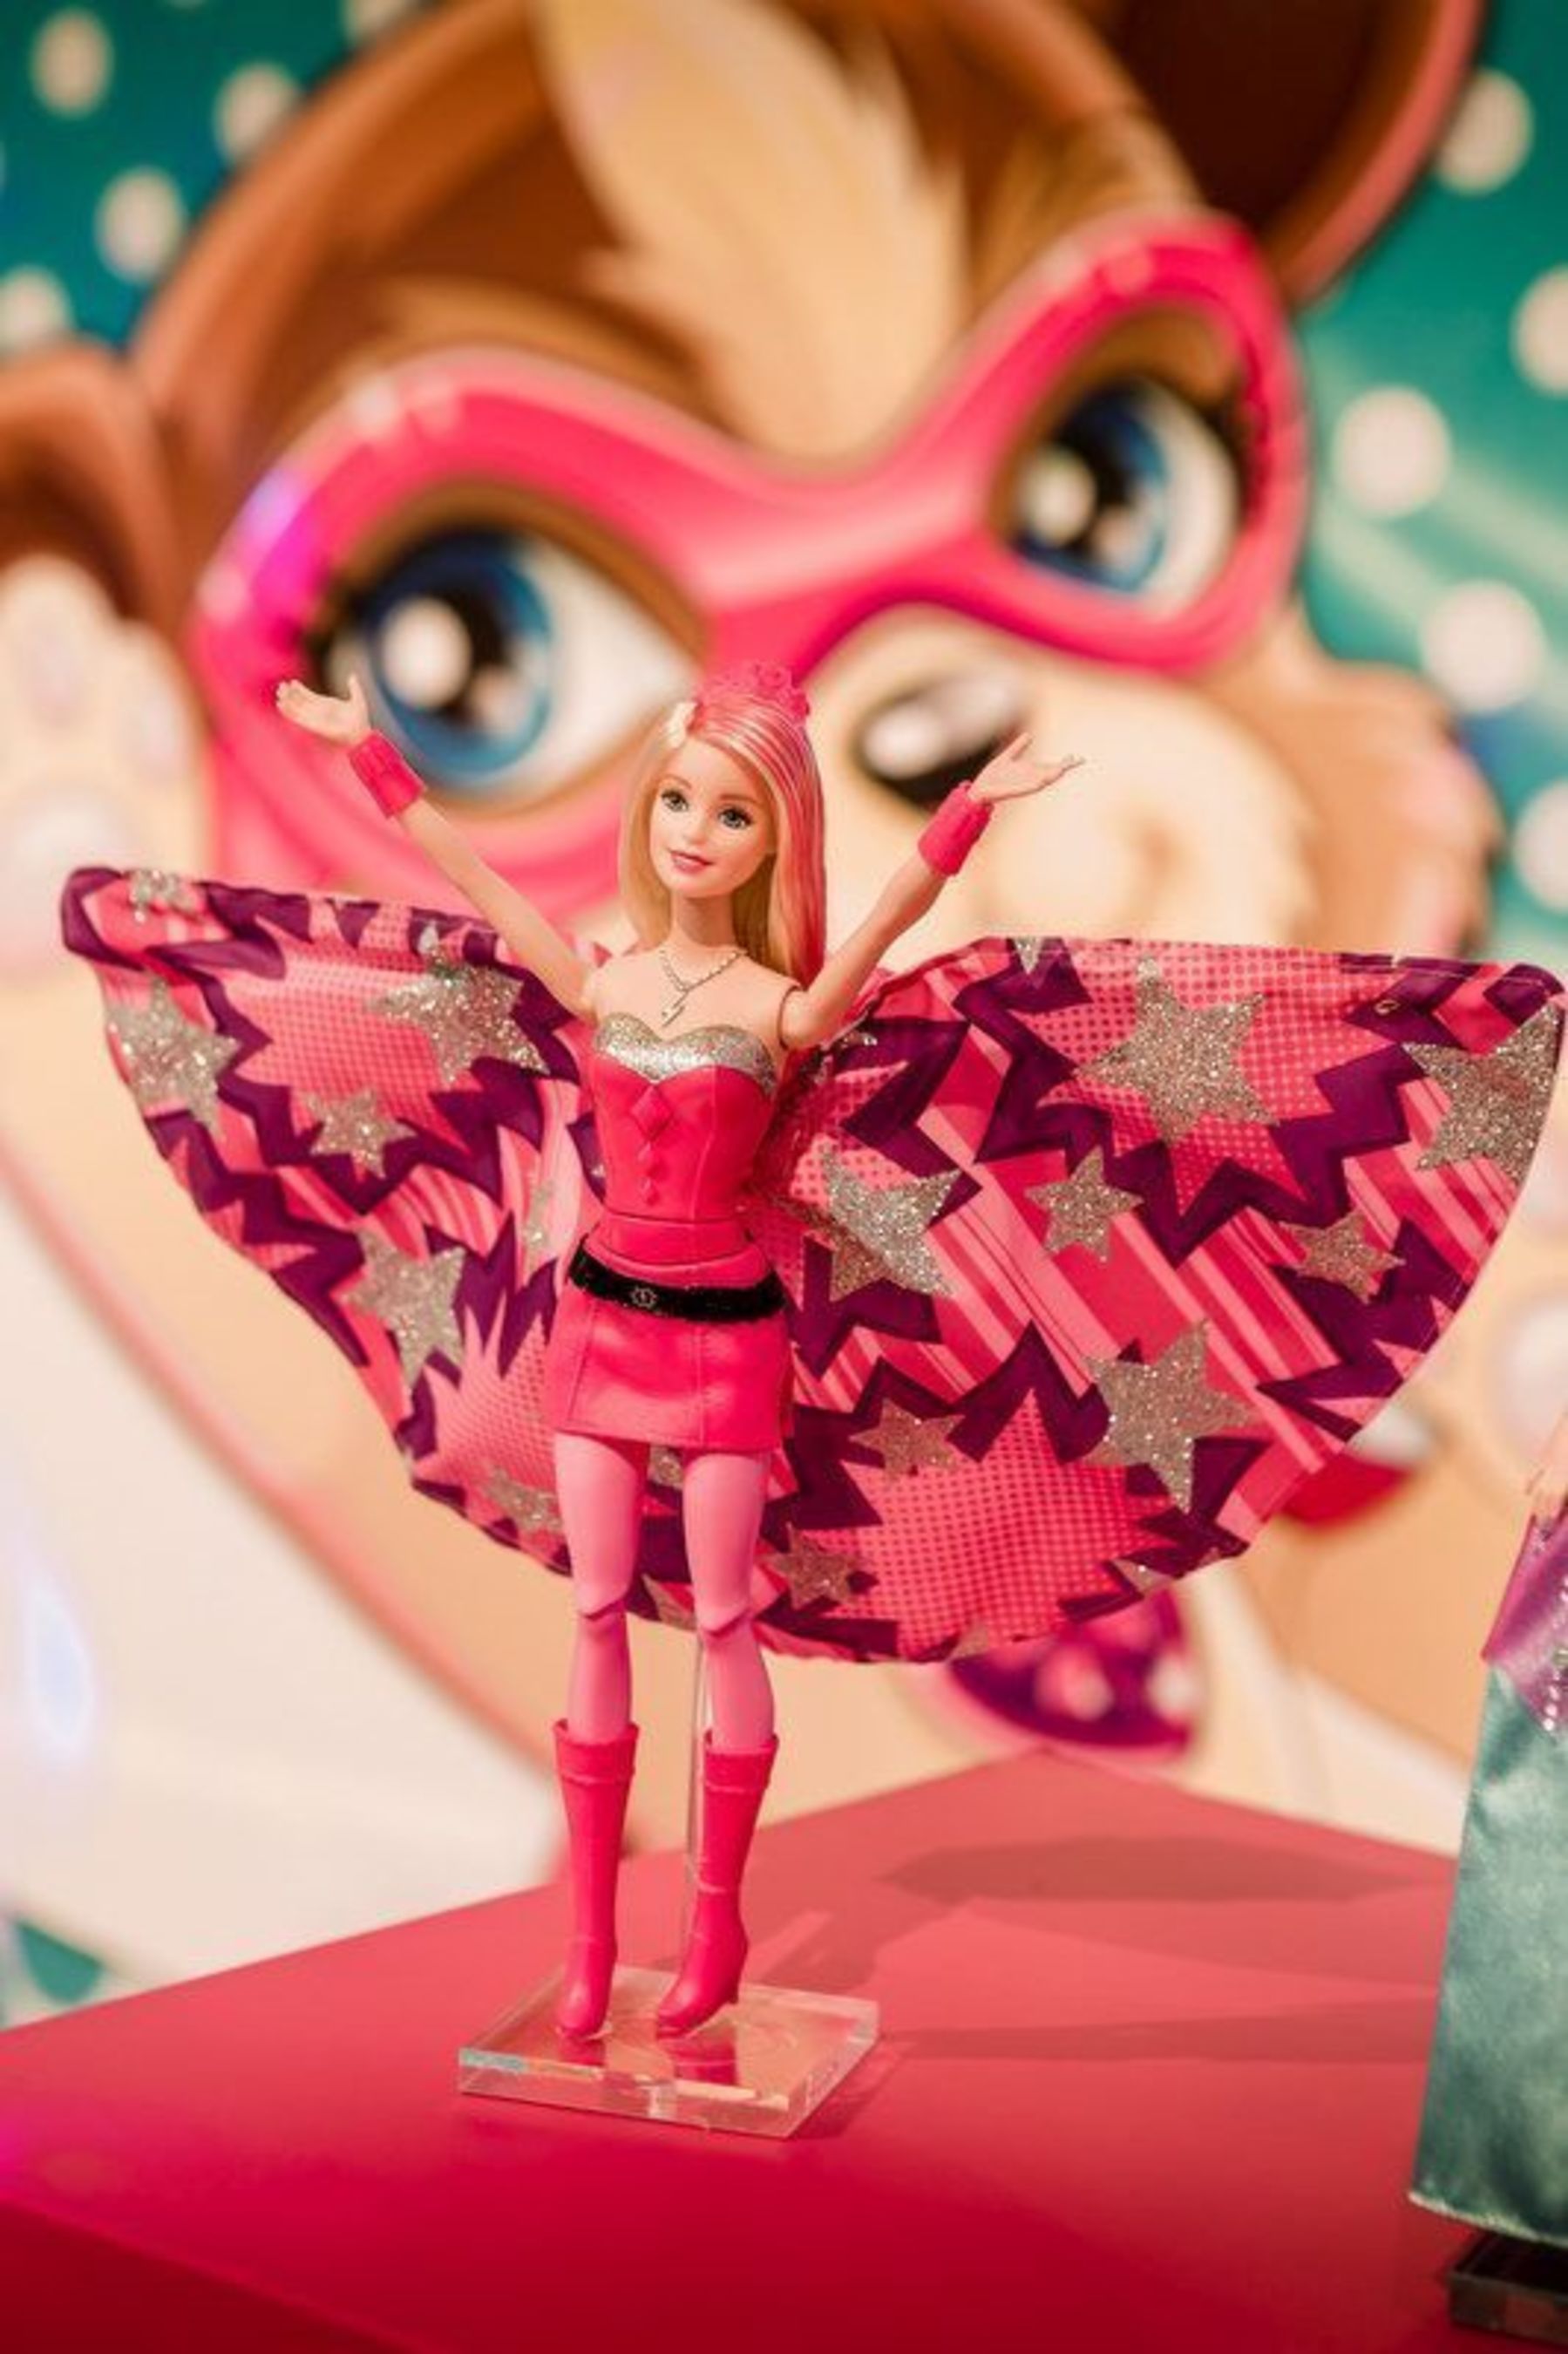 For the First Time in History, Barbie(TM) Makes Superhero Debut with "Barbie(TM) in Princess Power" at Nuremberg Toy Fair 2015 (PRNewsFoto/Mattel)